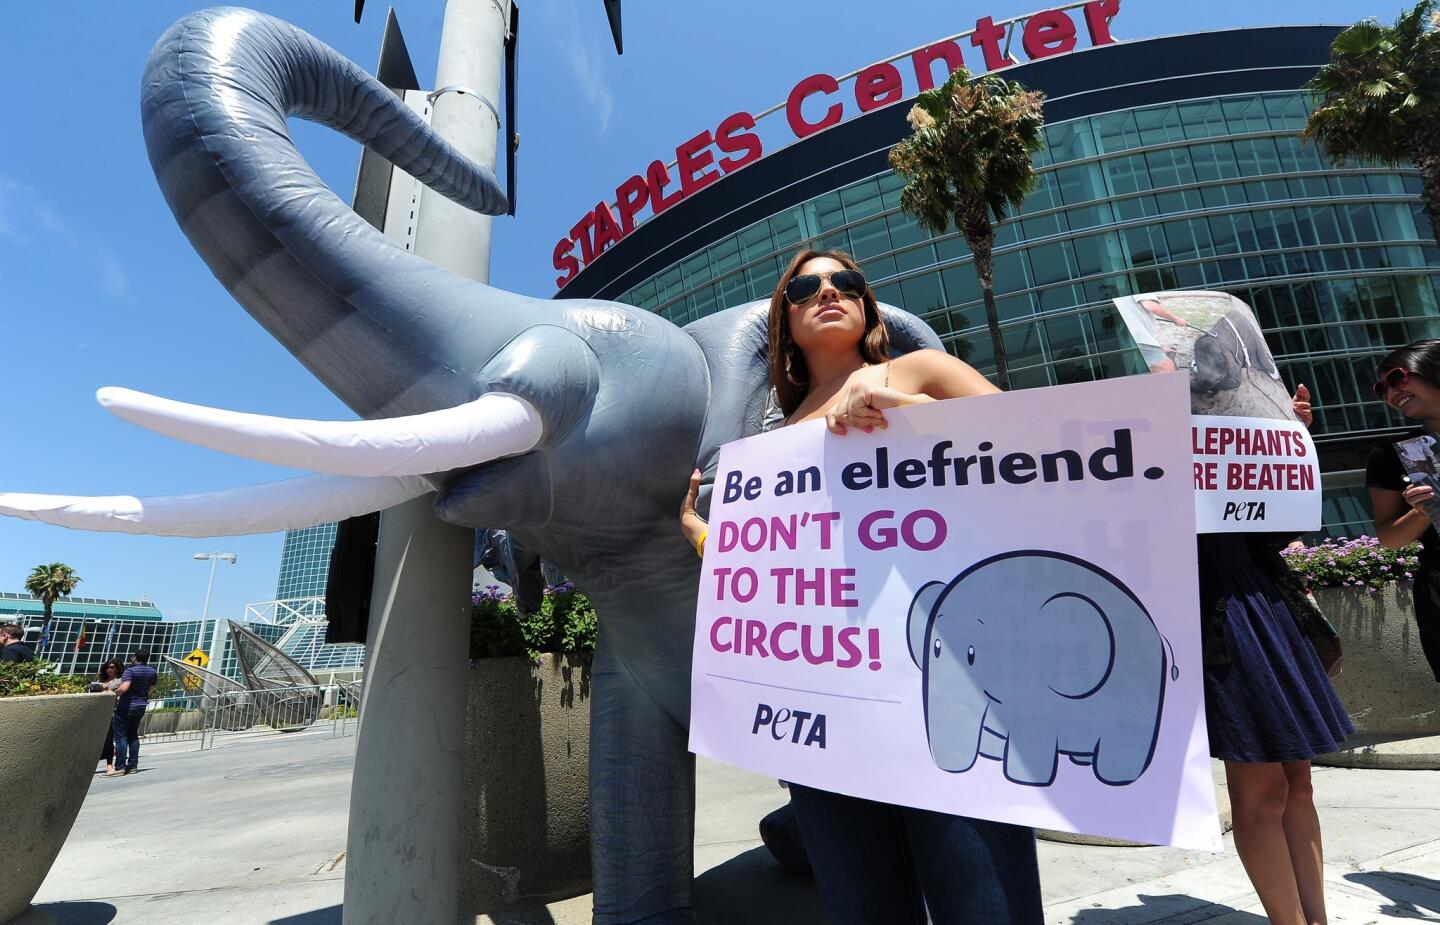 An animal rights activist holds a placard beside an inflatable elephant during a protest in front of the Staples Center in Los Angeles, on July 11, 2012 in California, on the opening day of the Ringling Bros. and Barnum & Bailey Circus.